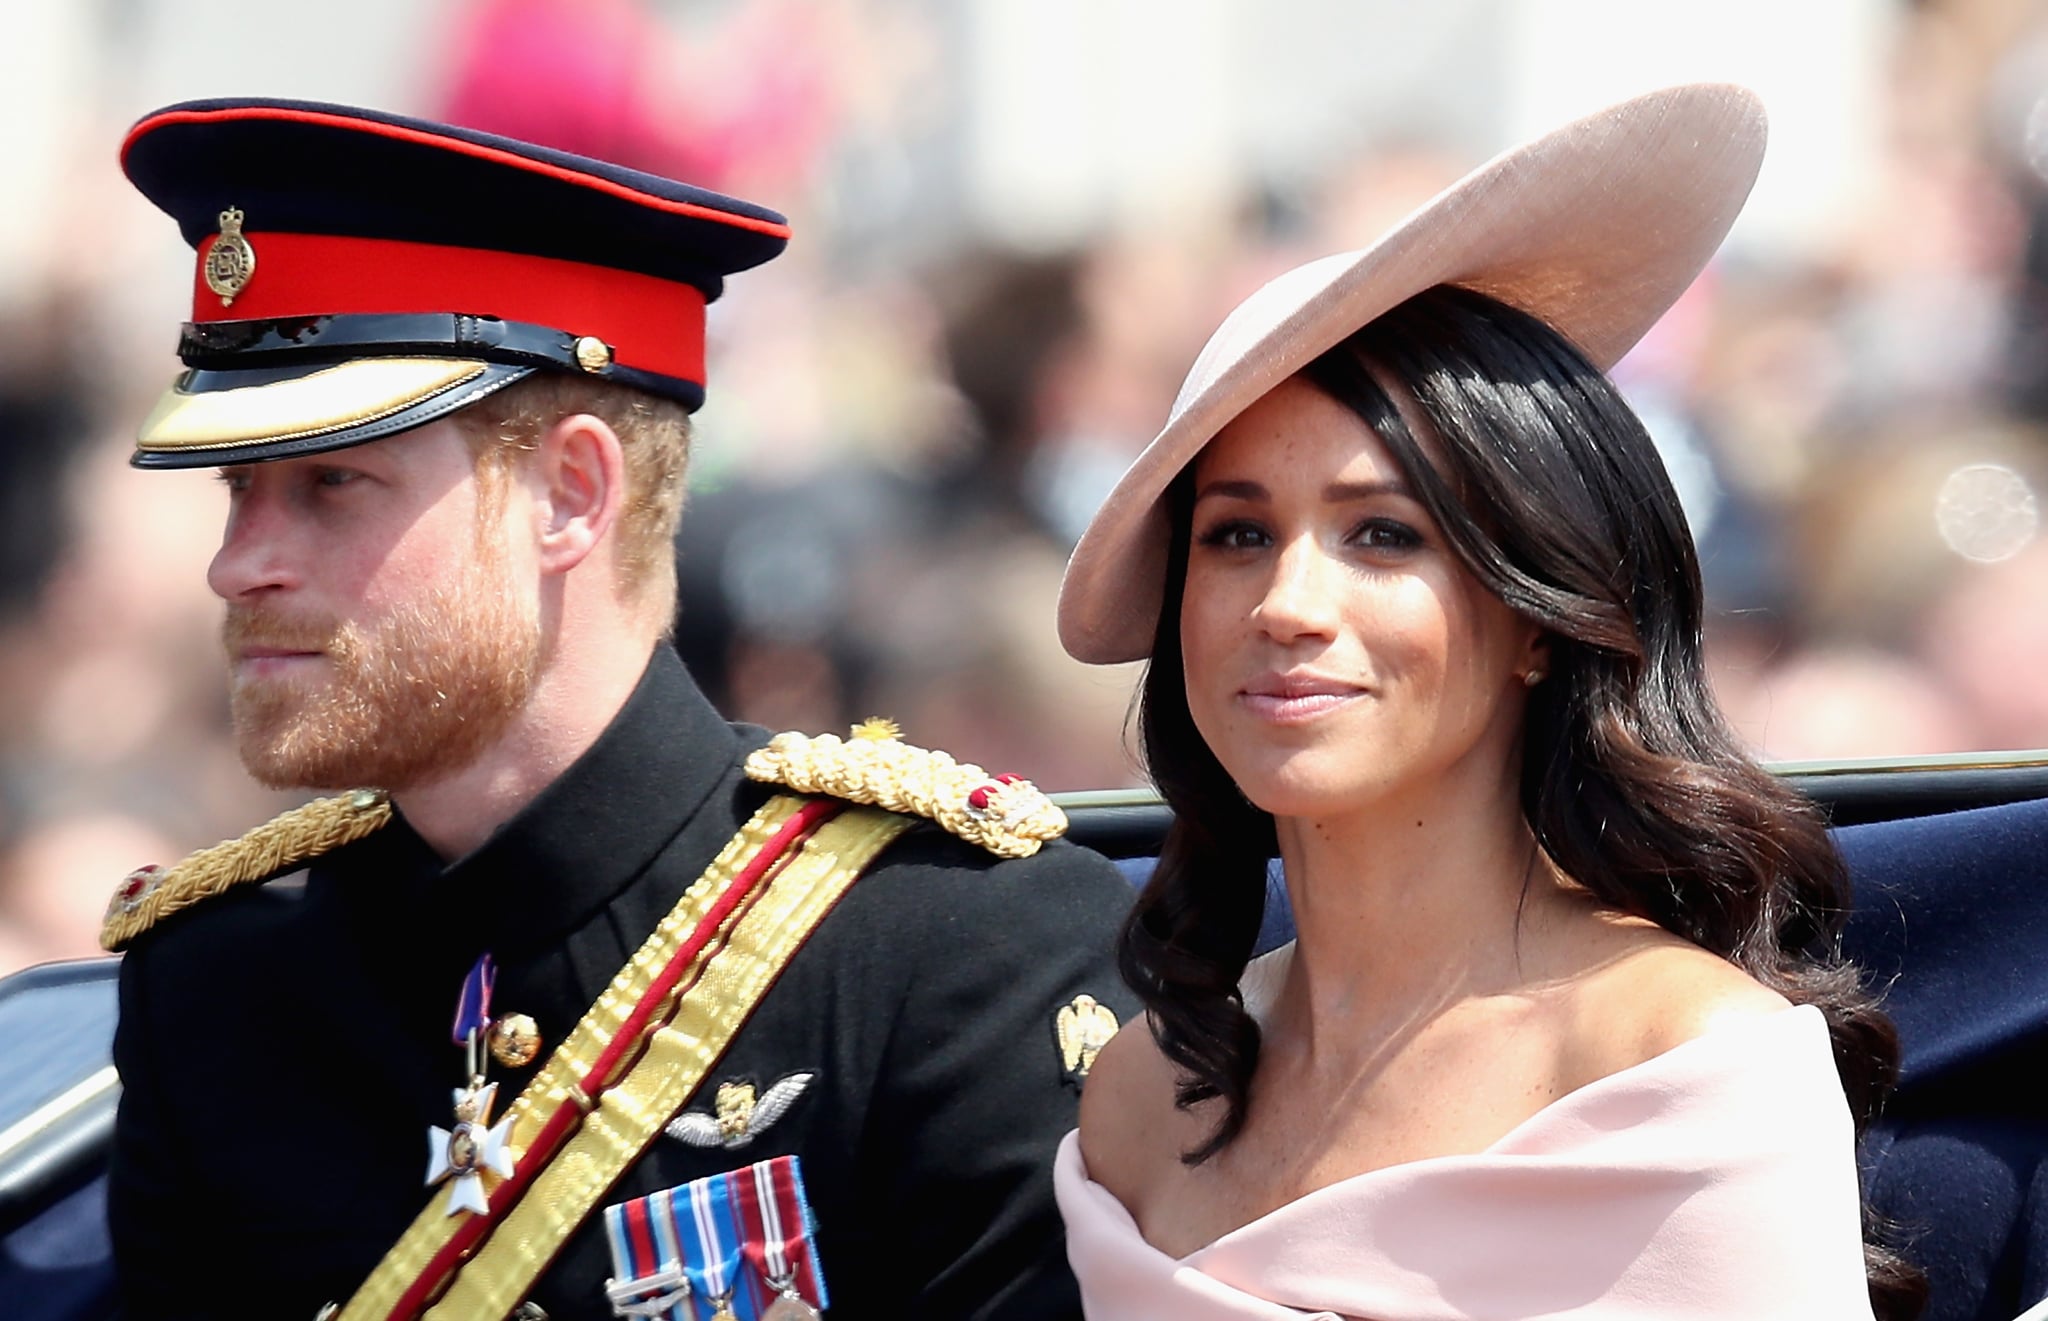 LONDON, ENGLAND - JUNE 09:  Meghan, Duchess of Sussex and Prince Harry, Duke of Sussex during Trooping The Colour on the Mall on June 9, 2018 in London, England. The annual ceremony involving over 1400 guardsmen and cavalry, is believed to have first been performed during the reign of King Charles II. The parade marks the official birthday of the Sovereign, even though the Queen's actual birthday is on April 21st. .  (Photo by Chris Jackson/Getty Images)